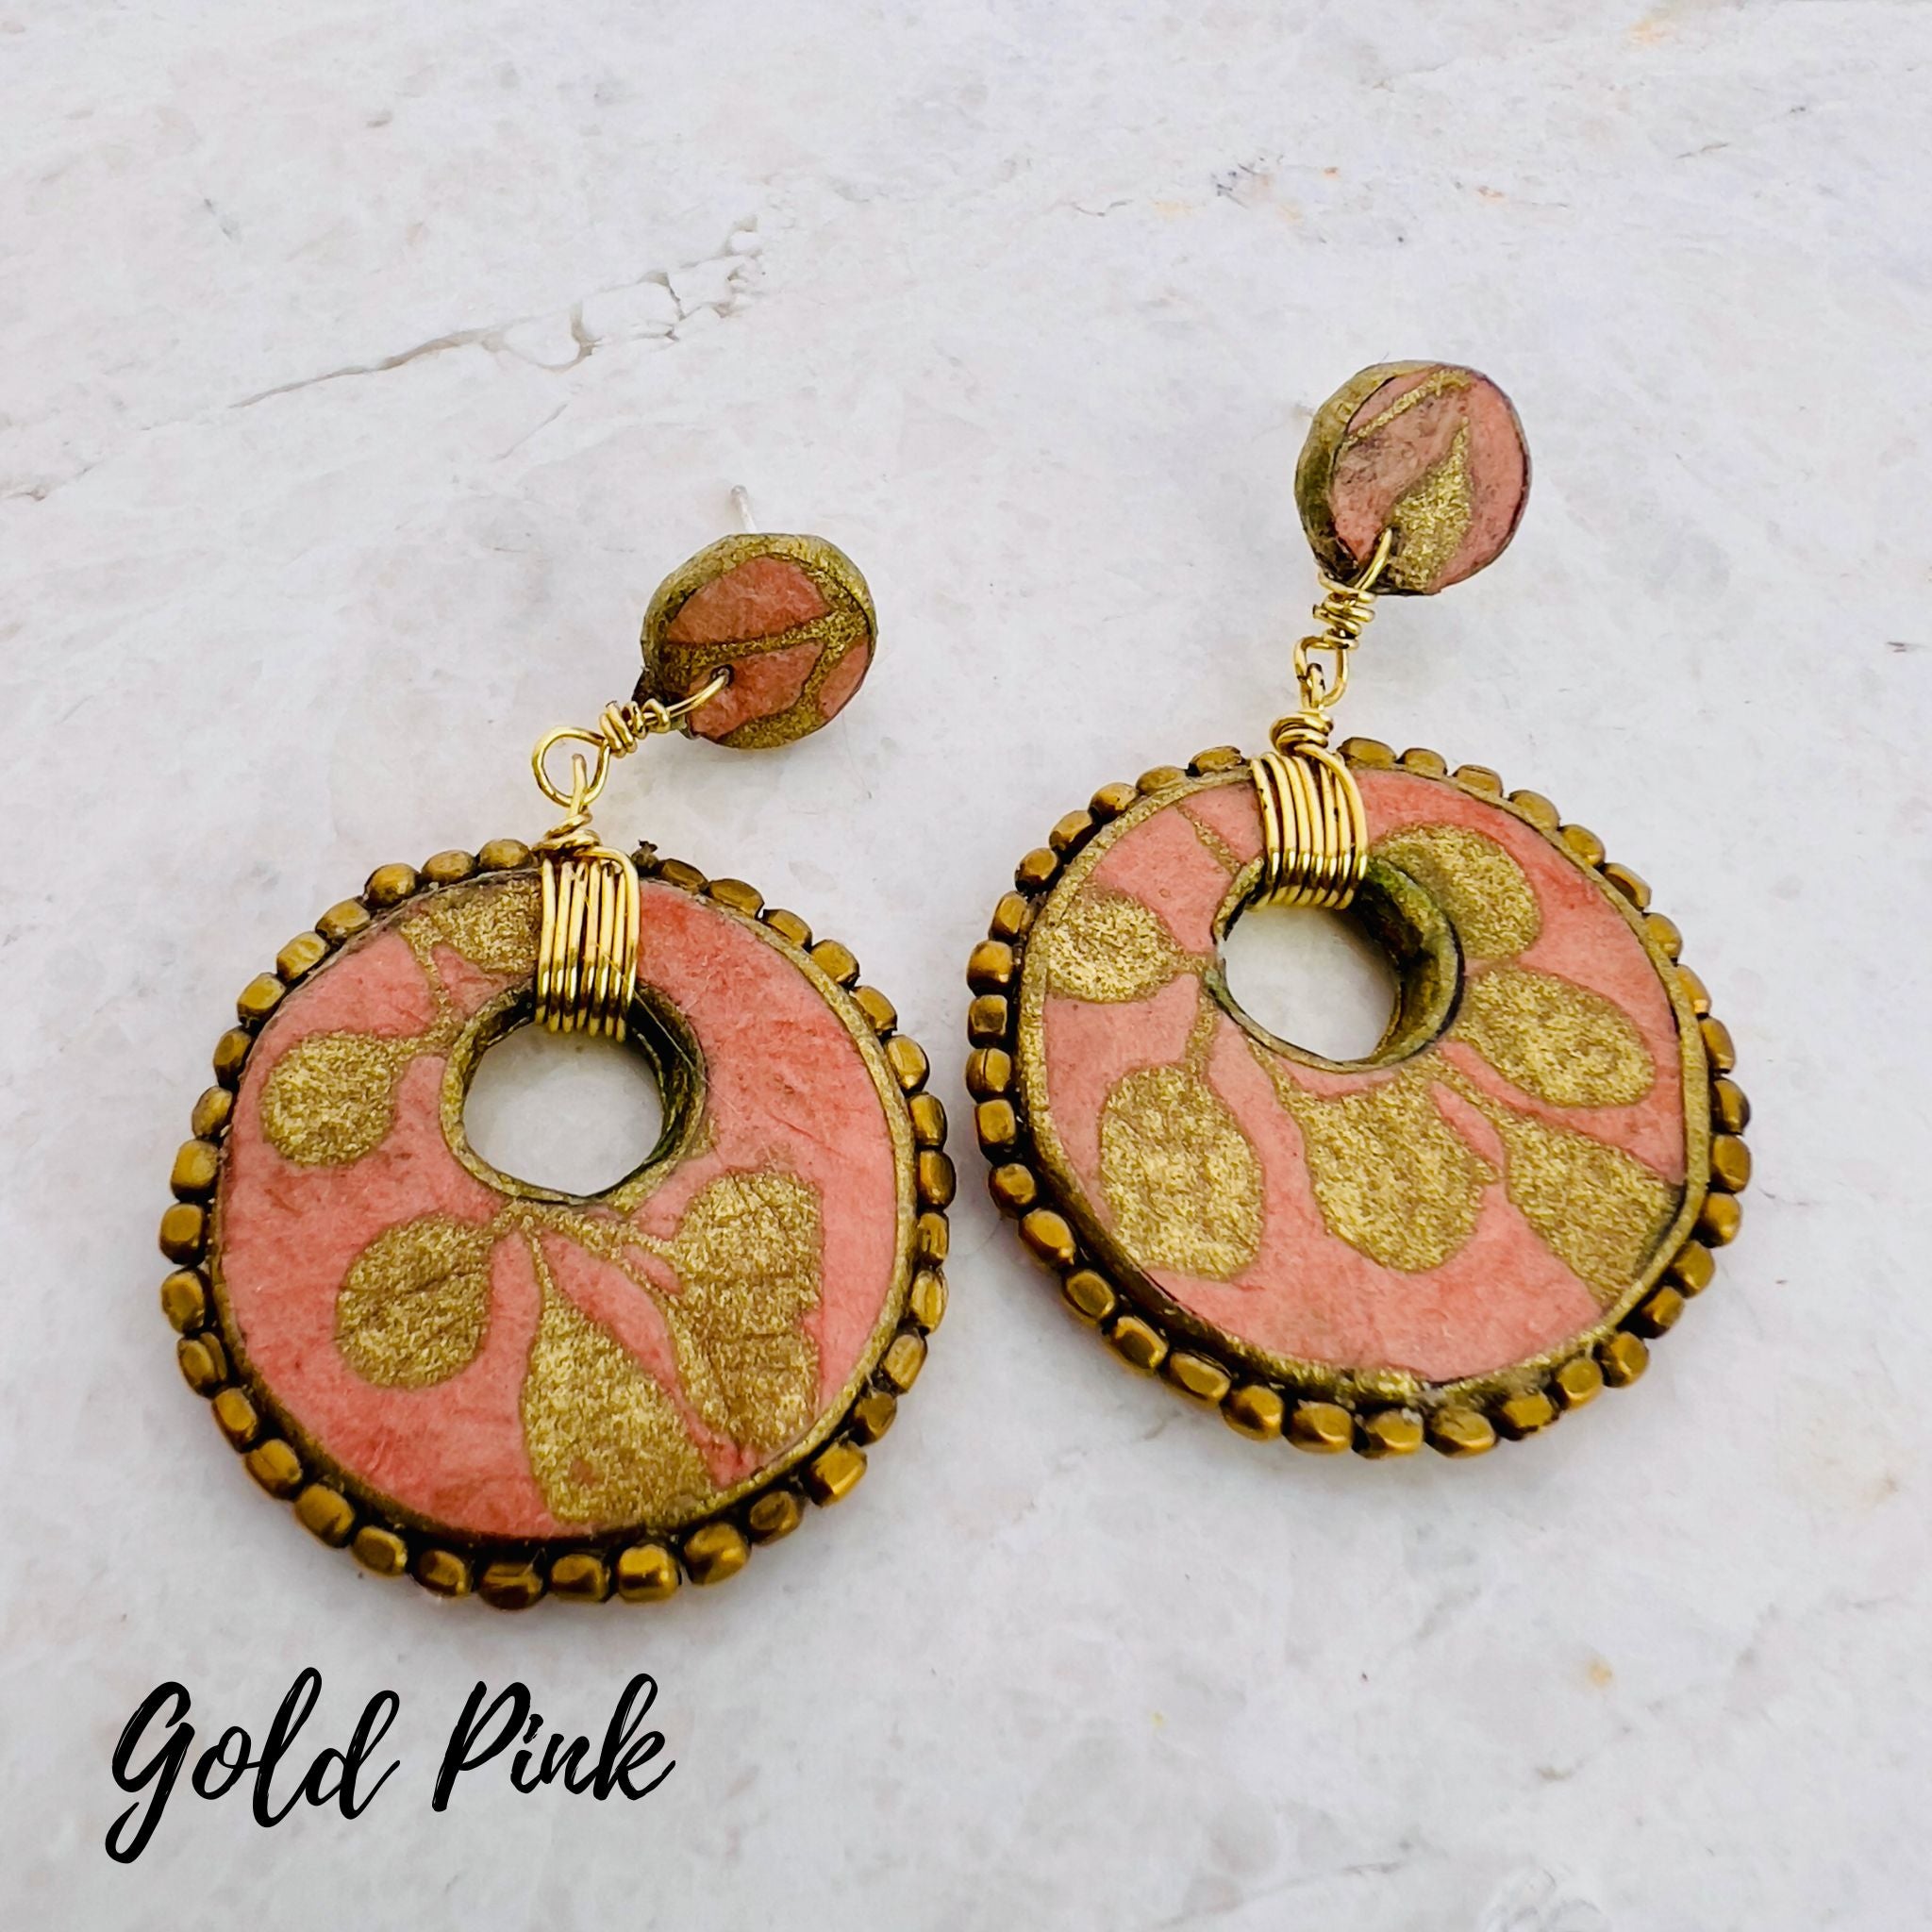 Earrings by Elaine Graham of Panache Design. Made in Washington, USA. Gold and Pink